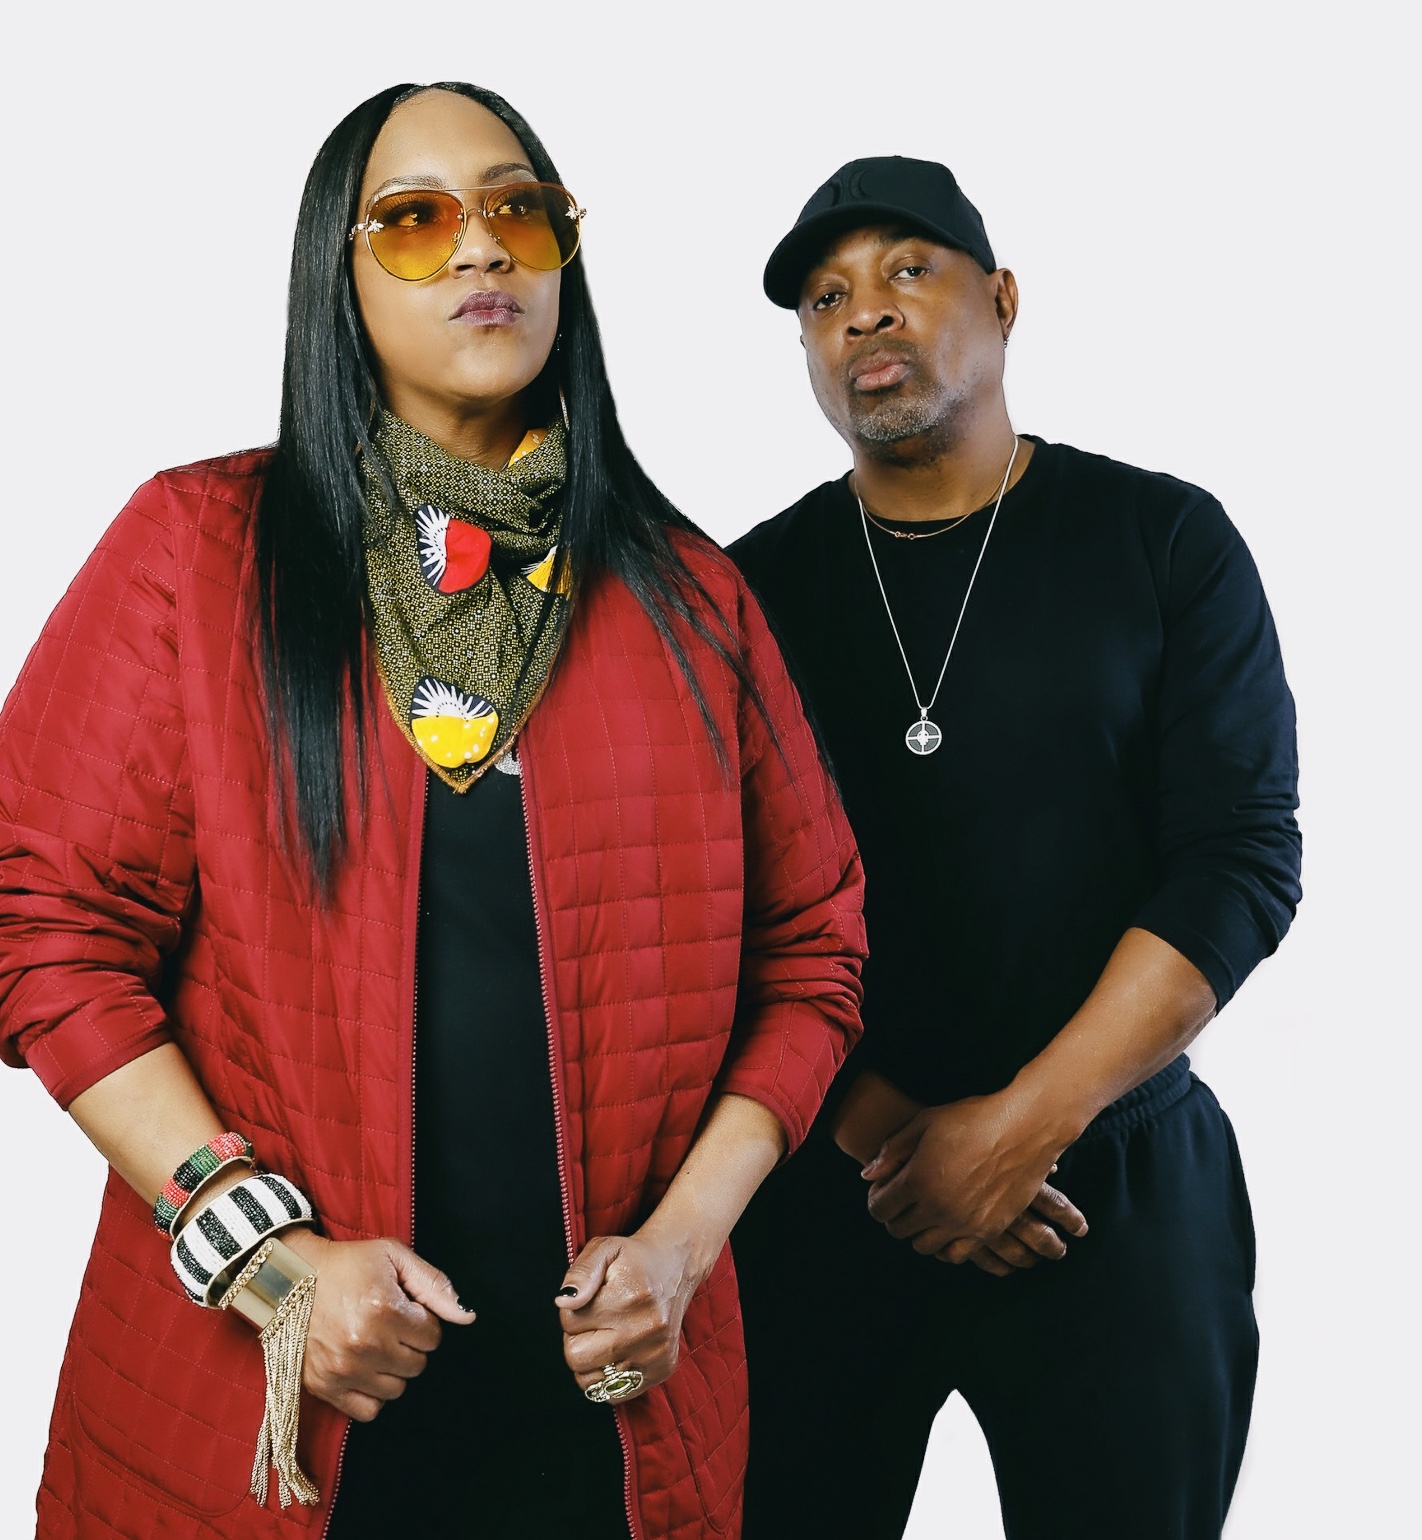 Retina.MC Talks Songwriting, Working with Chuck D, and Their Upcoming Track “RAP”